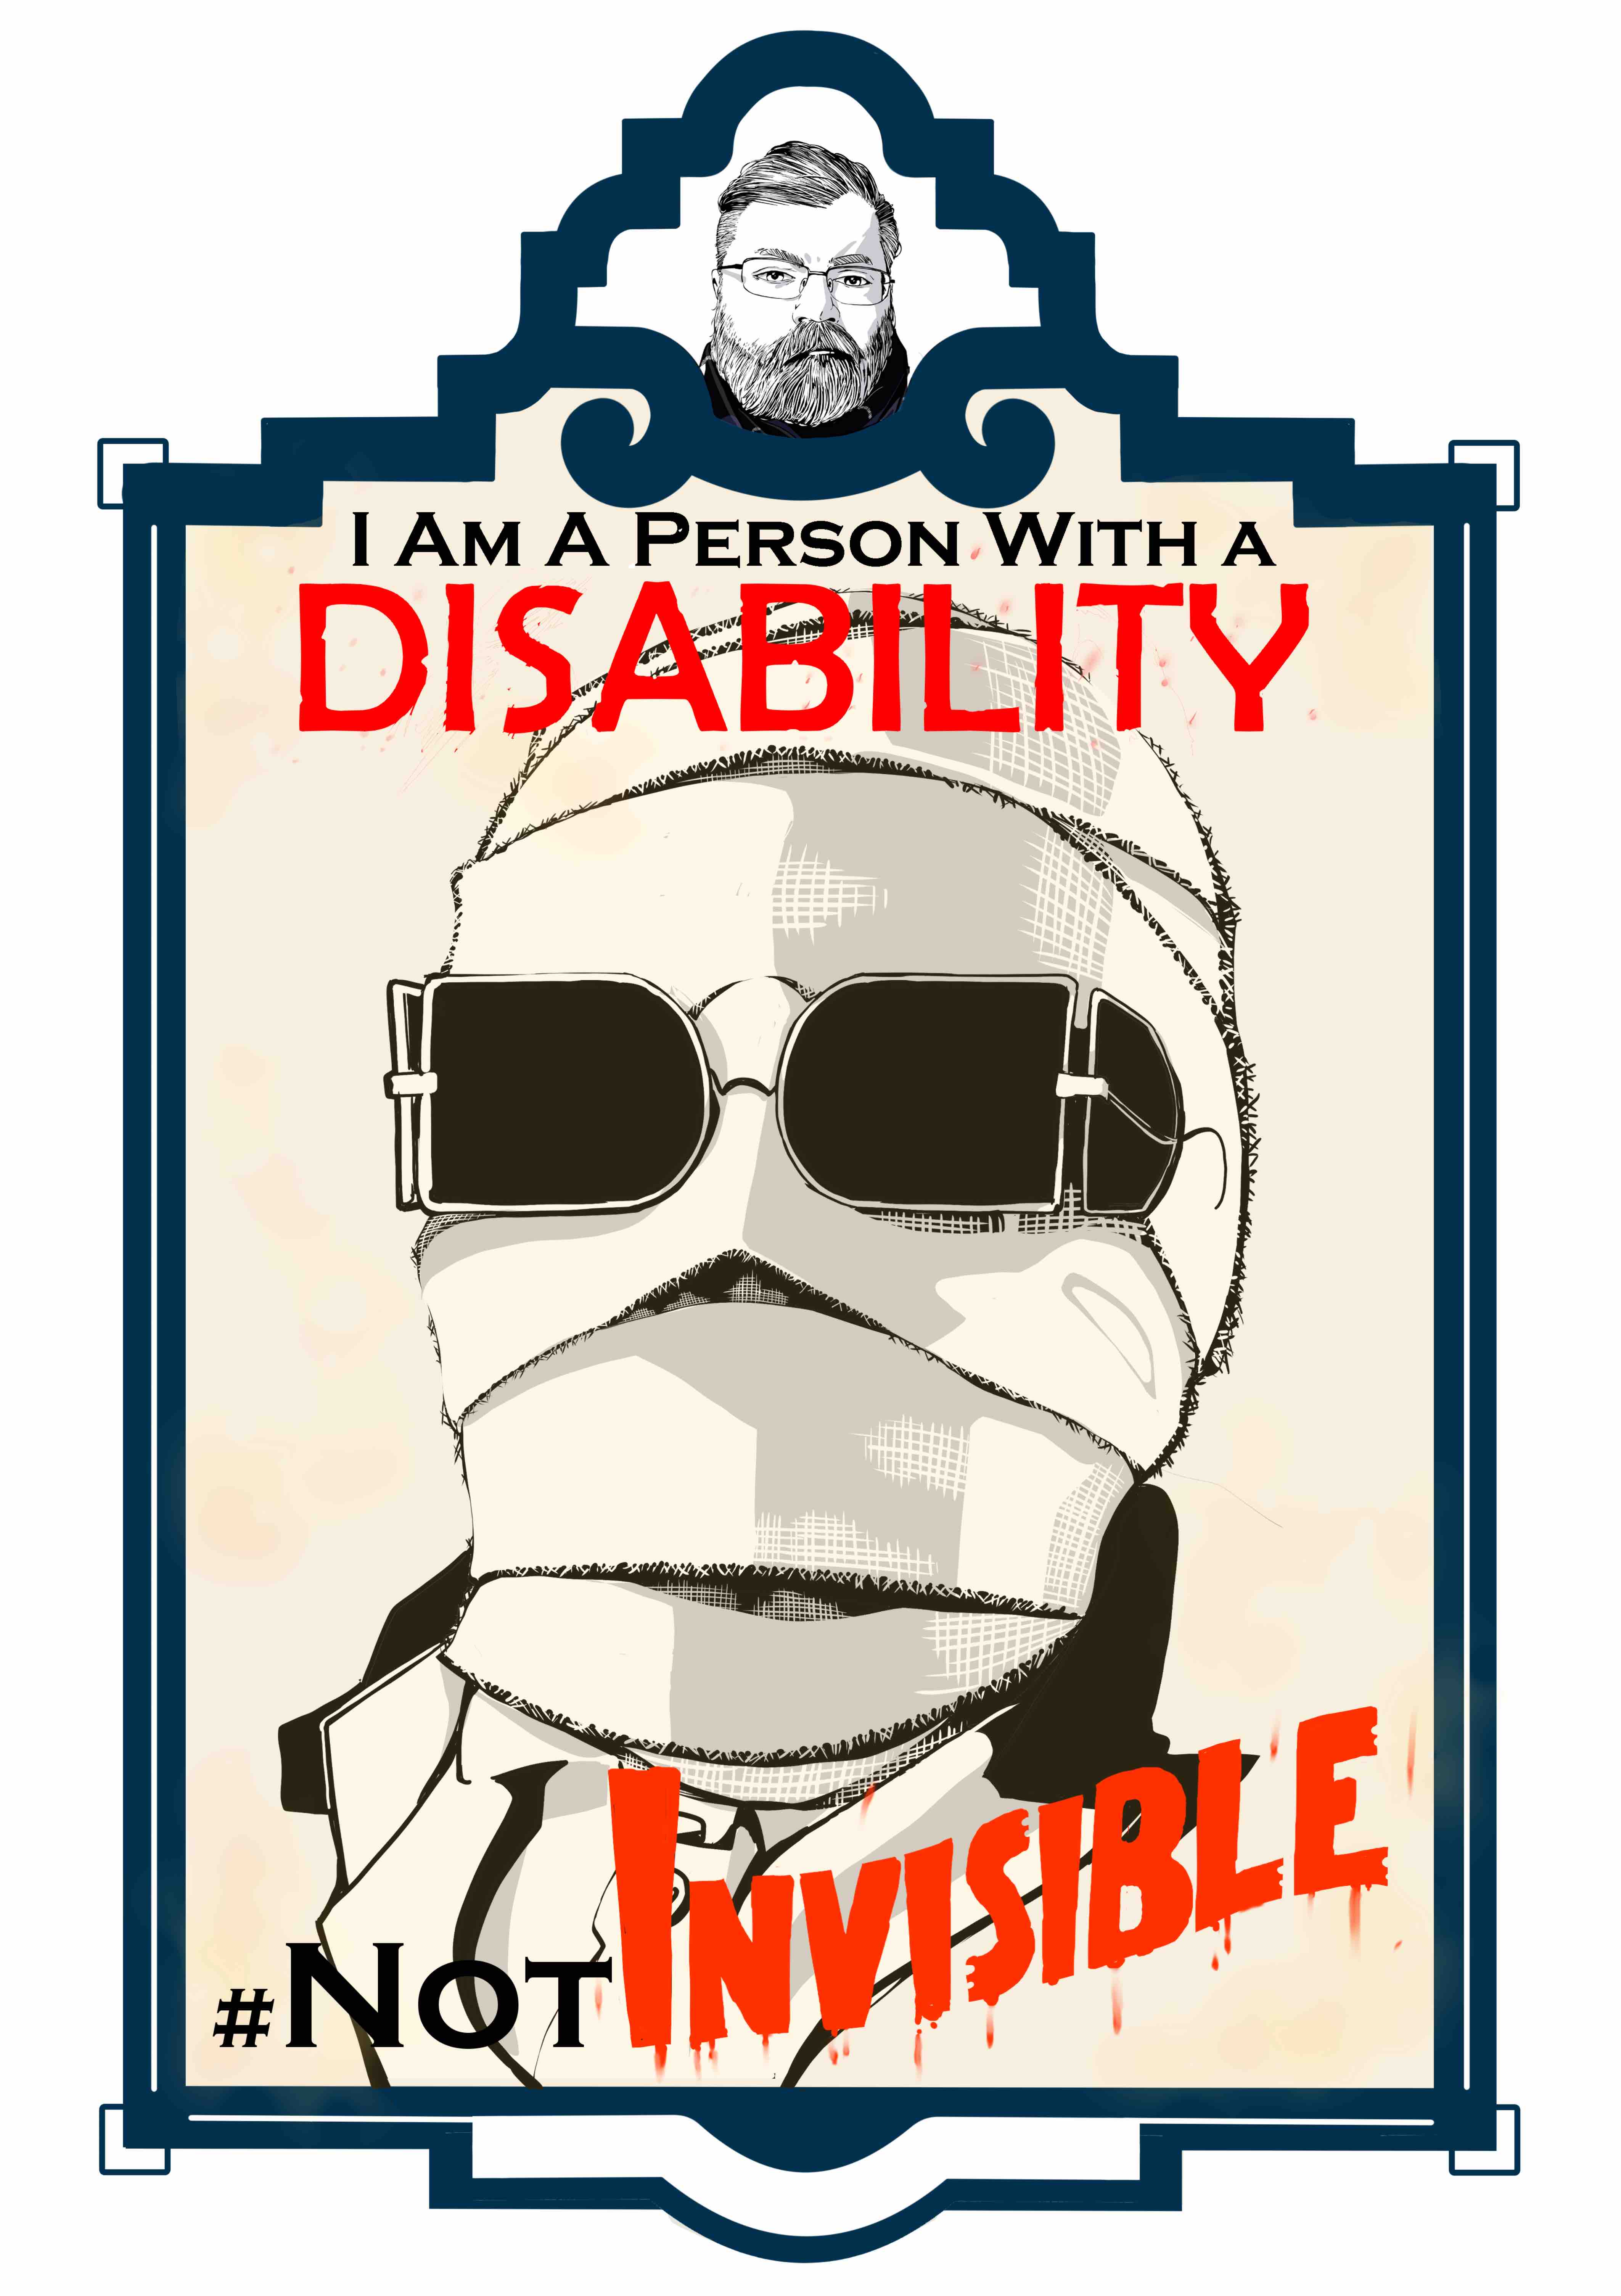 An illustration of the invisible man from the neck up in an art deco frame. The frame consists of a small marquee at the top with an image of the artist and the main image below. The text “I am a person with a disability.’ Sits at the top of the illustration. The word “Disability” is in all caps and is colored a bright red with puffs of paint around it. The text “# Not Invisible” is at the bottom of the illustration with “Invisible” in bright red. The text “Invisible’ is a wordmark shaped in a wave with paint dripping from it. The invisible man's face is wrapped in bandages. He wears vintage sunglasses with square frames on the outside that curve on the inside. The sunglasses have side panels. The illustration is colored with a light yellow to give it an aged look.